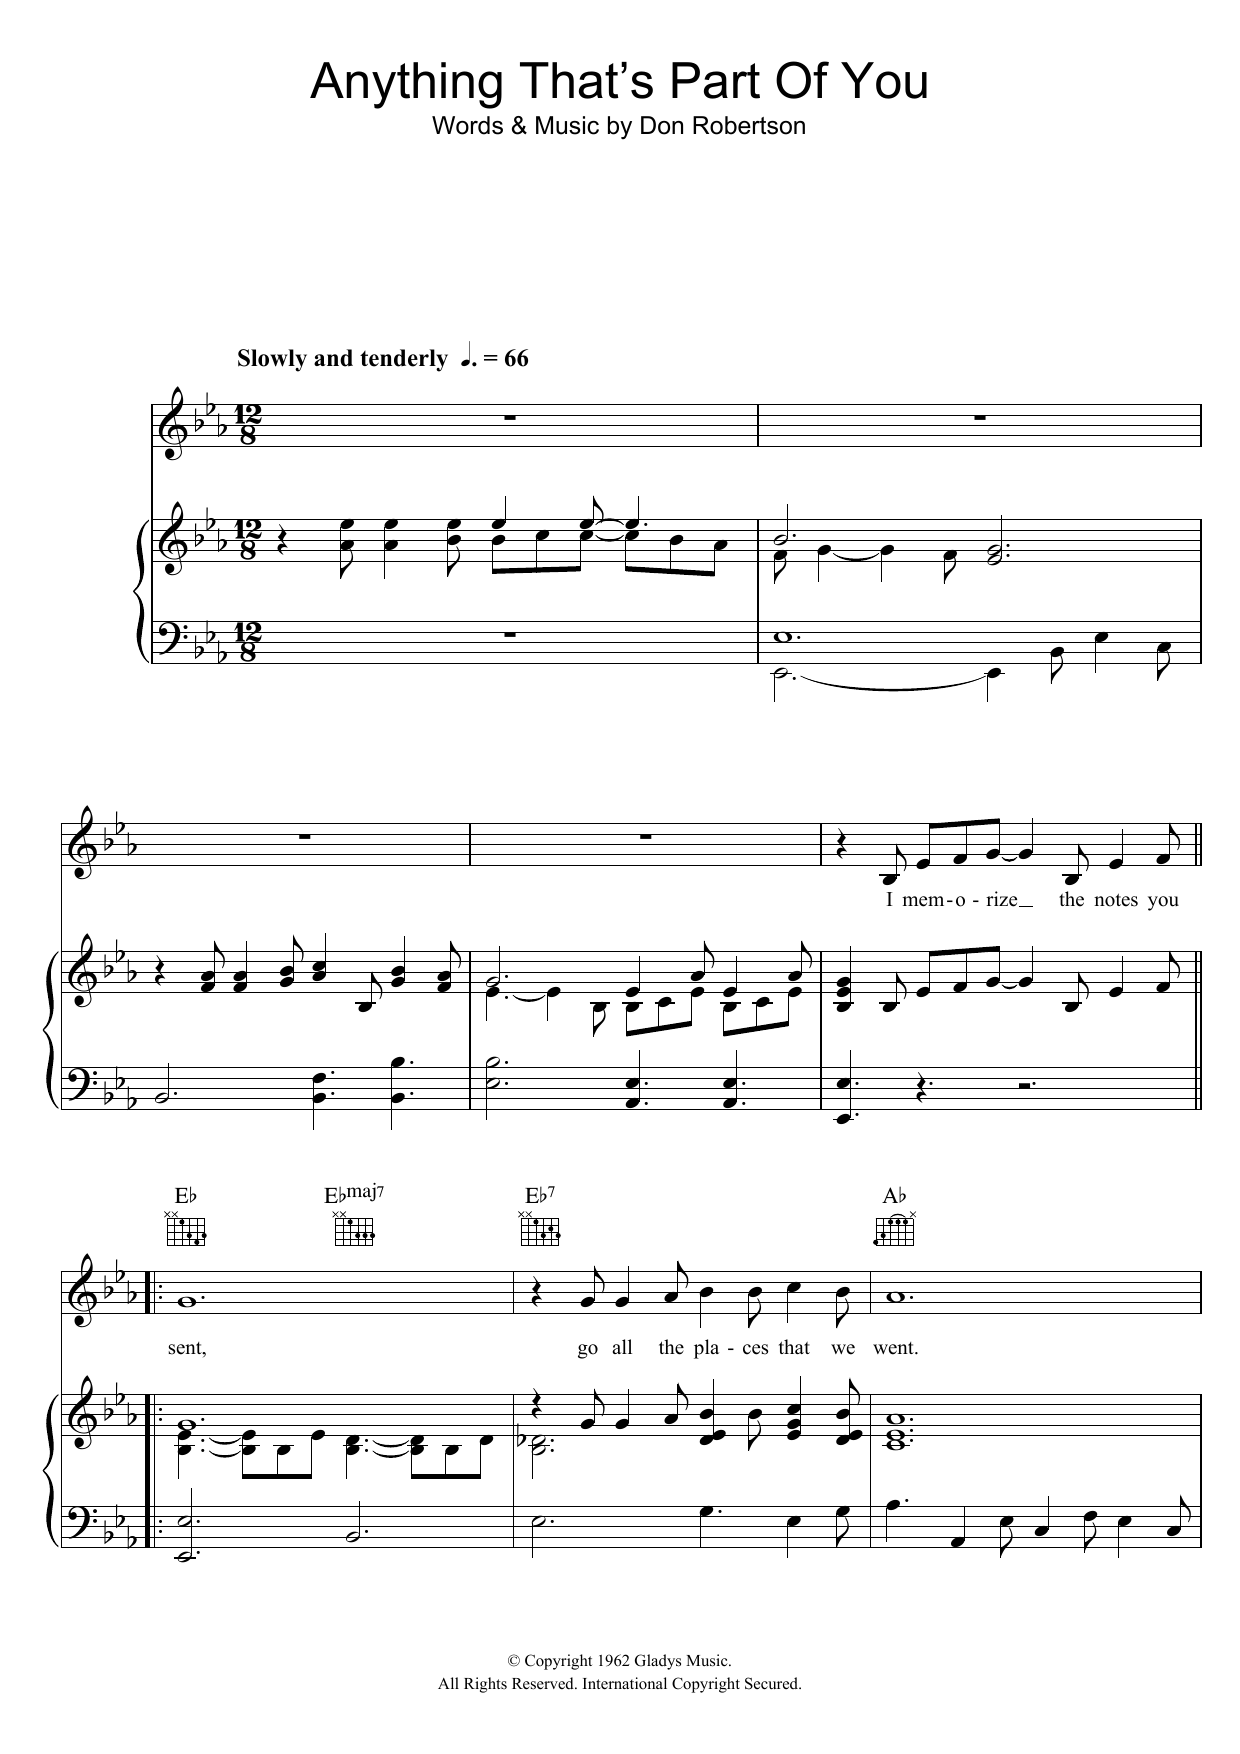 Download Elvis Presley Anything That's Part Of You Sheet Music